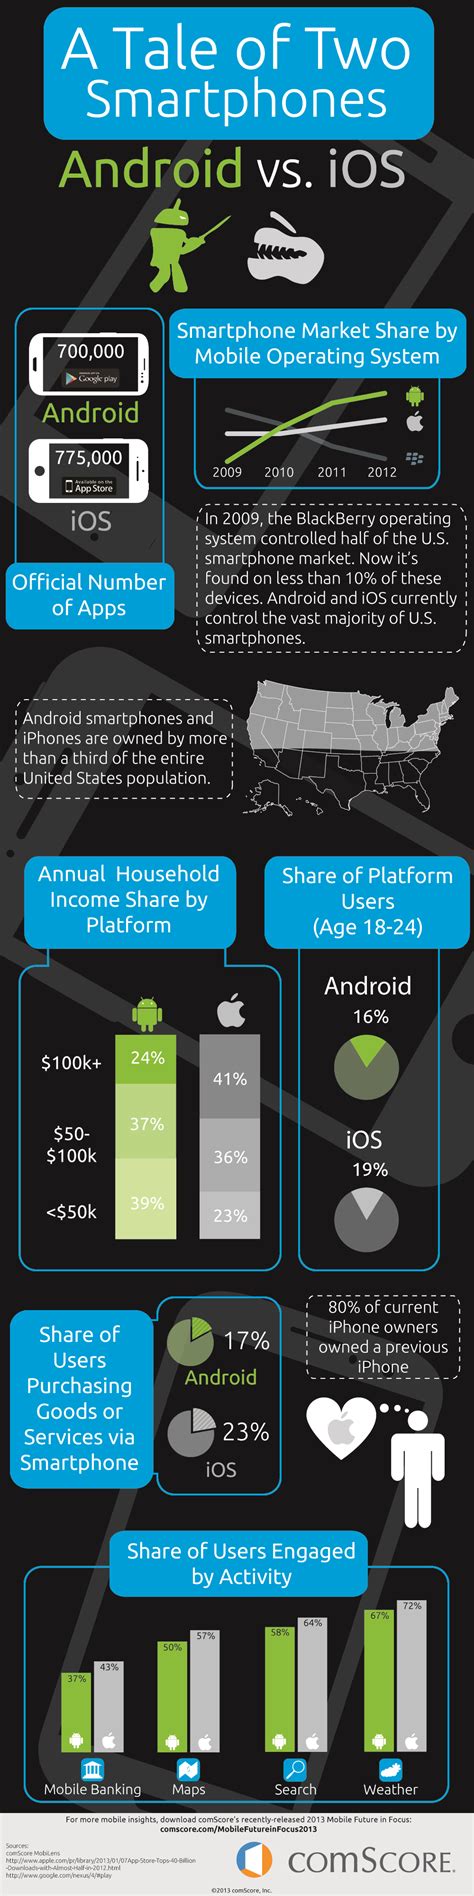 Android Vs Ios User Differences Every Developer Should Know